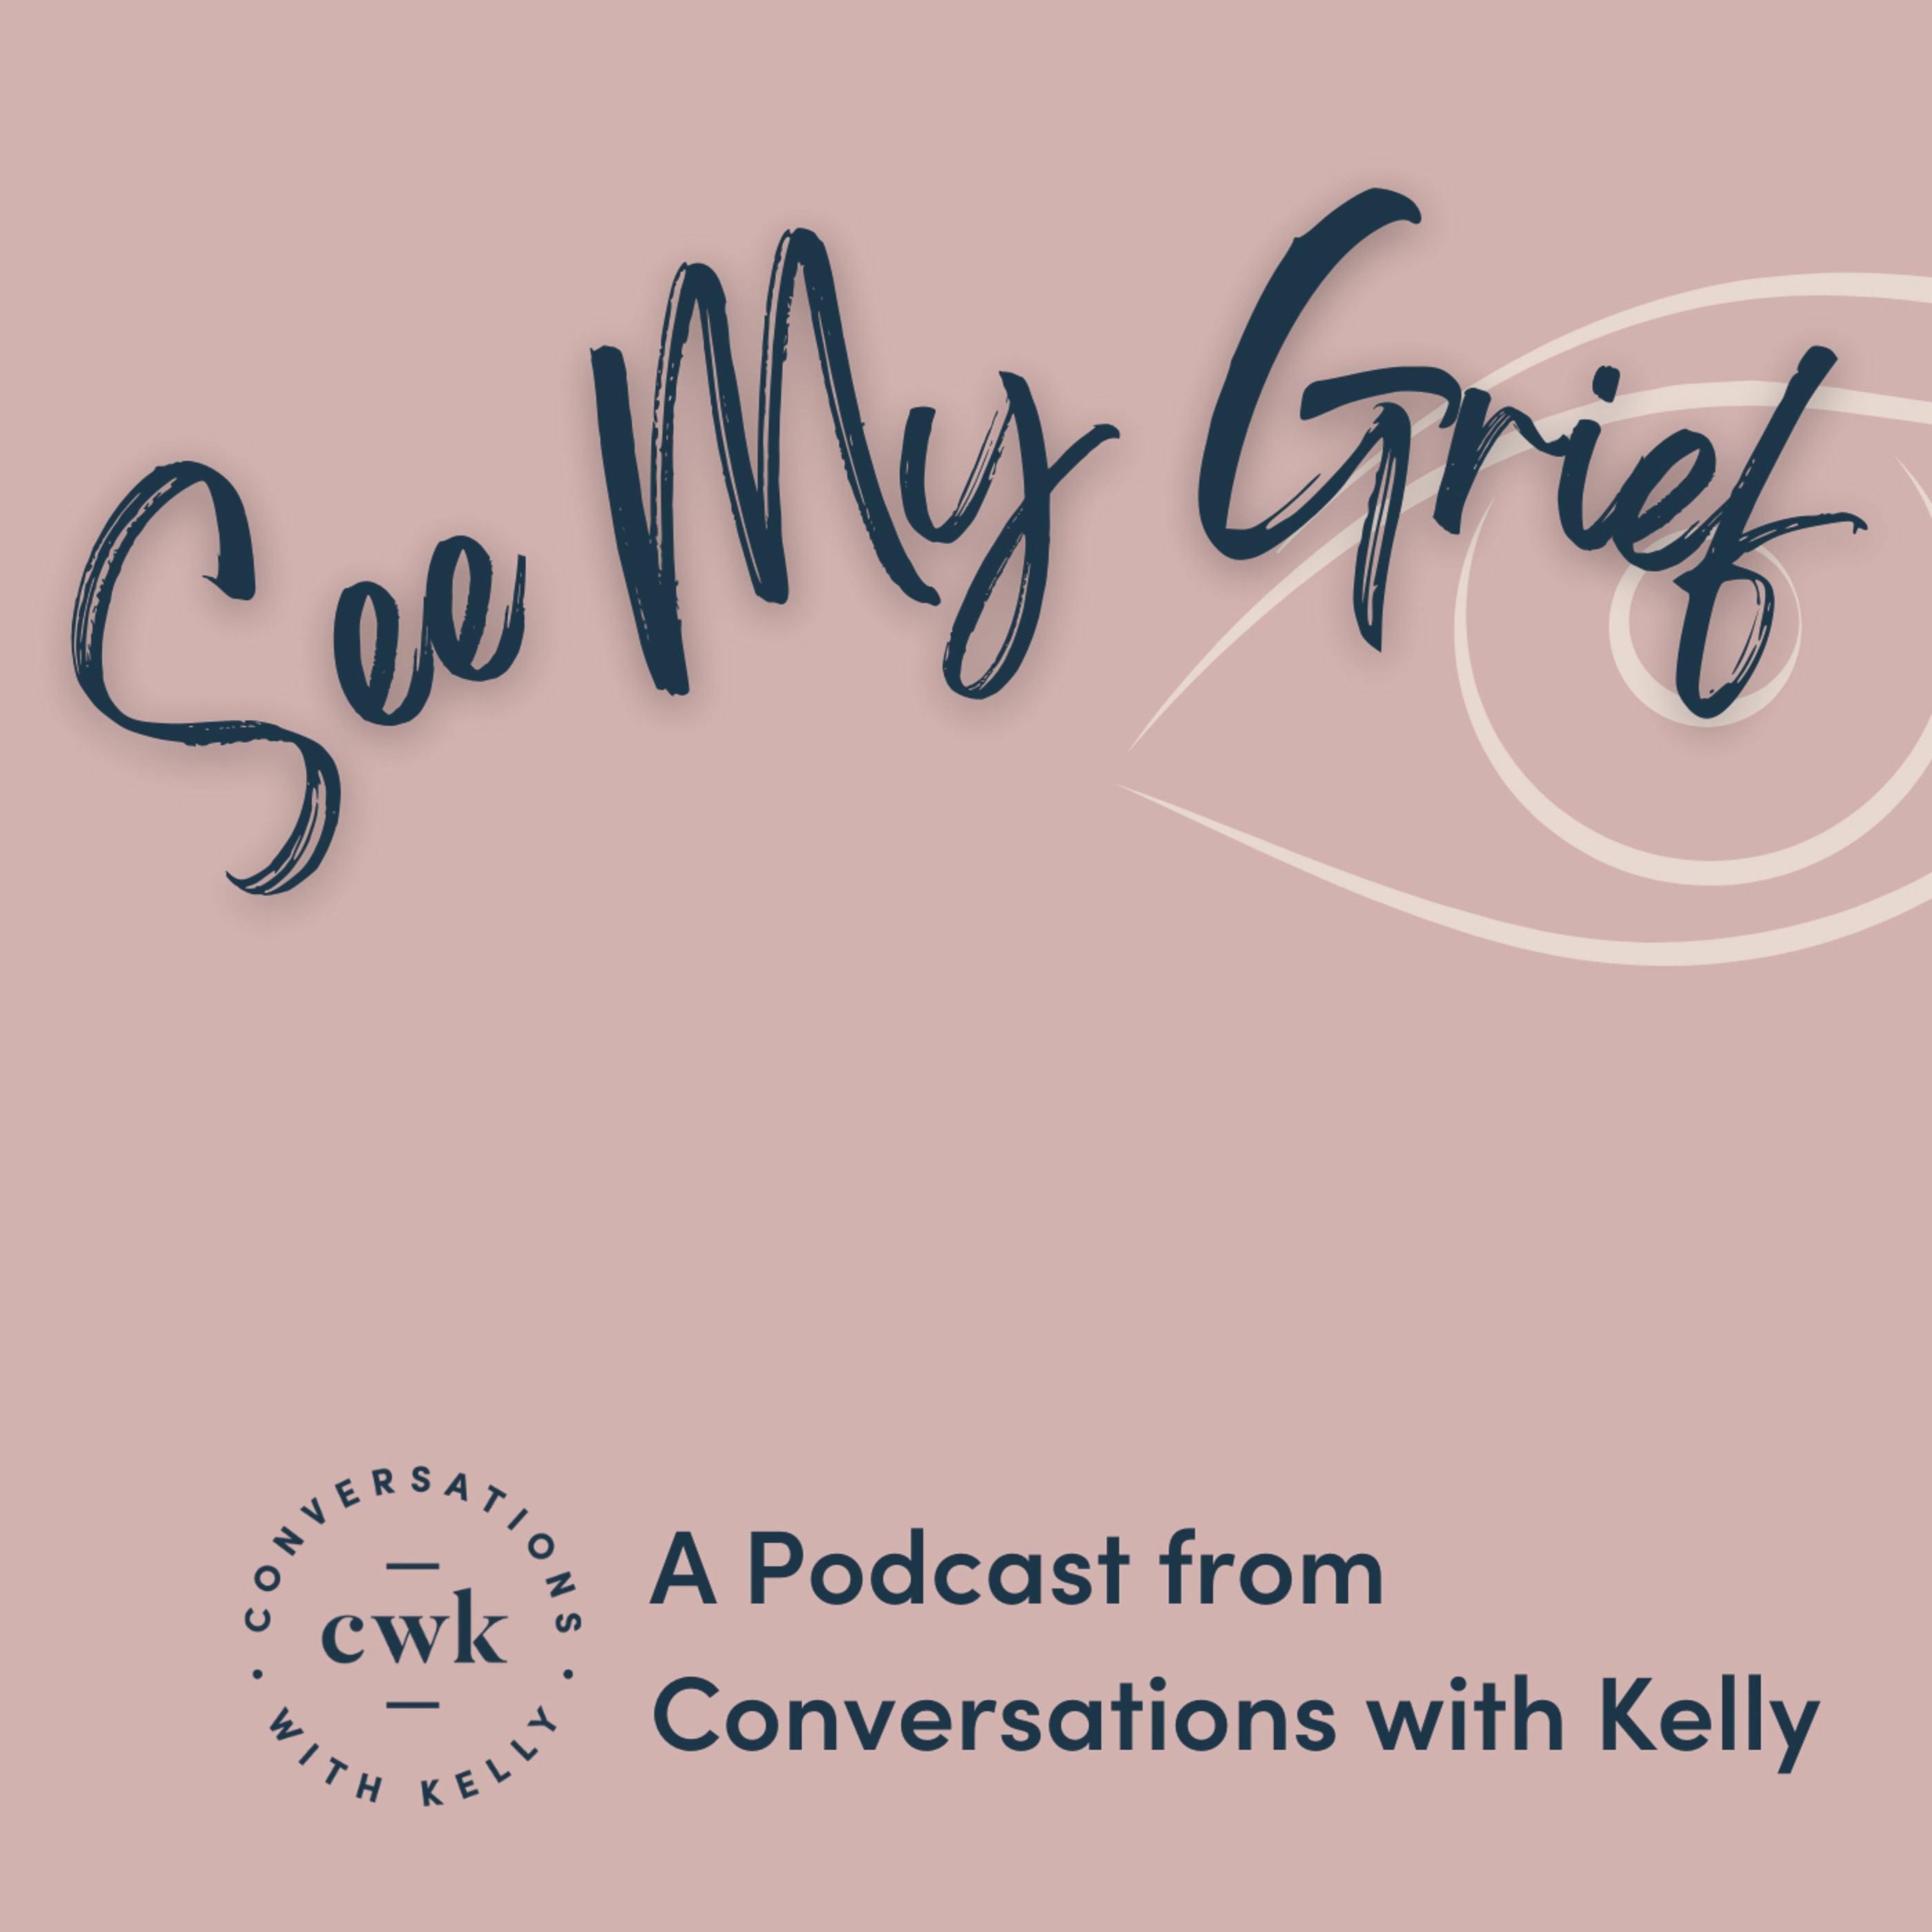 See My Grief - A Podcast from Conversations with Kelly